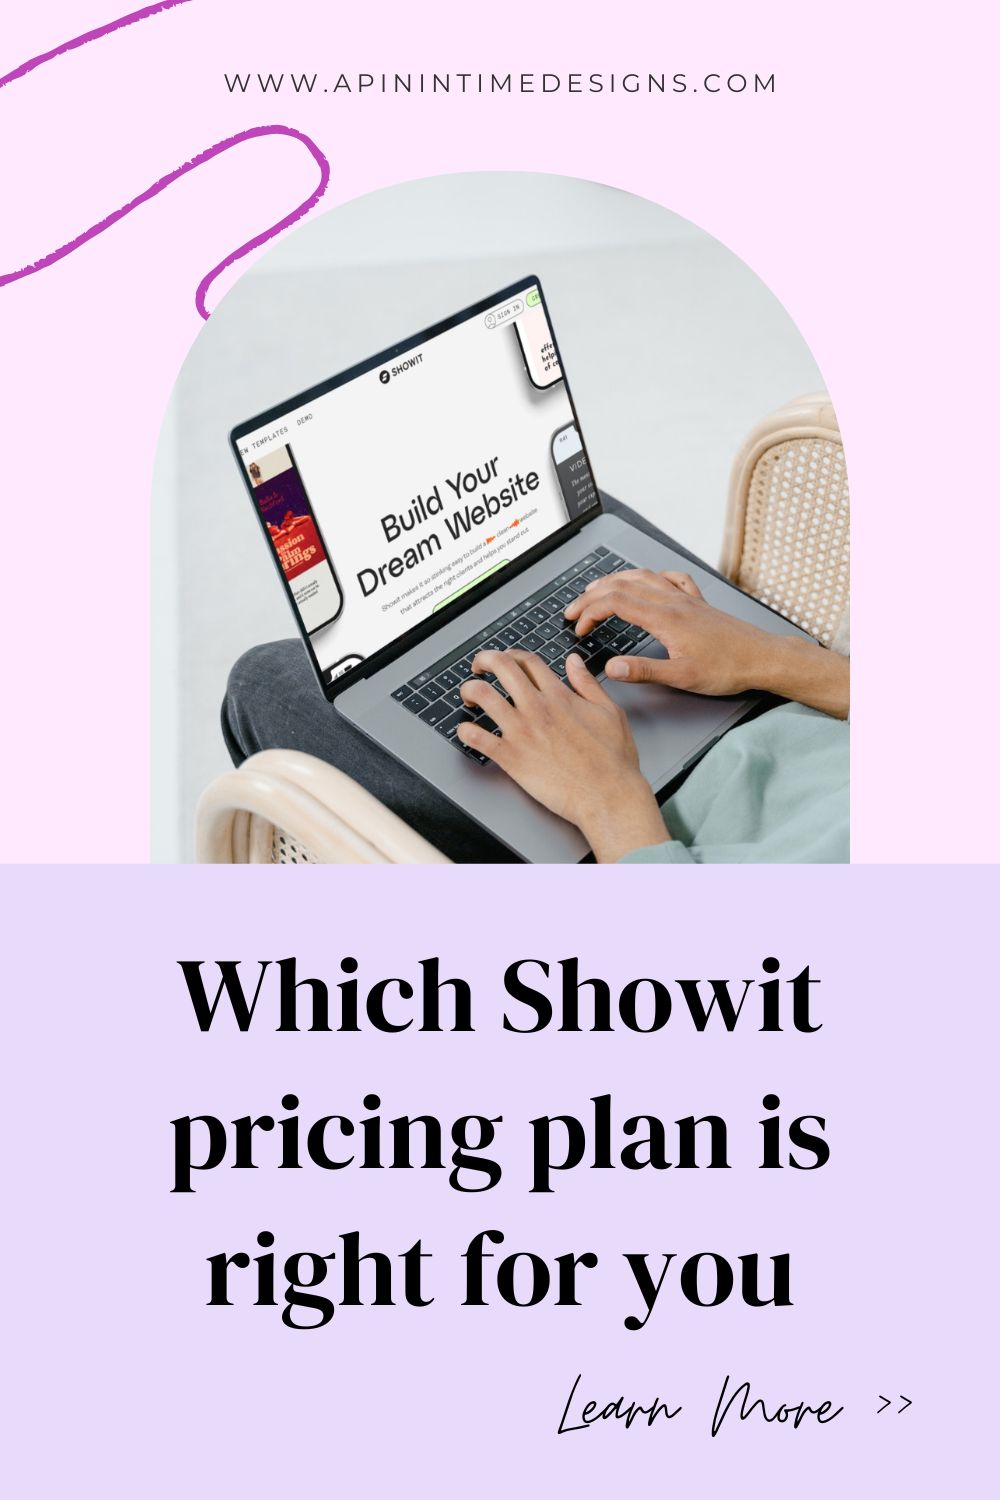 Pin image for this blog post on Which Showit Pricing Plan is right for your website